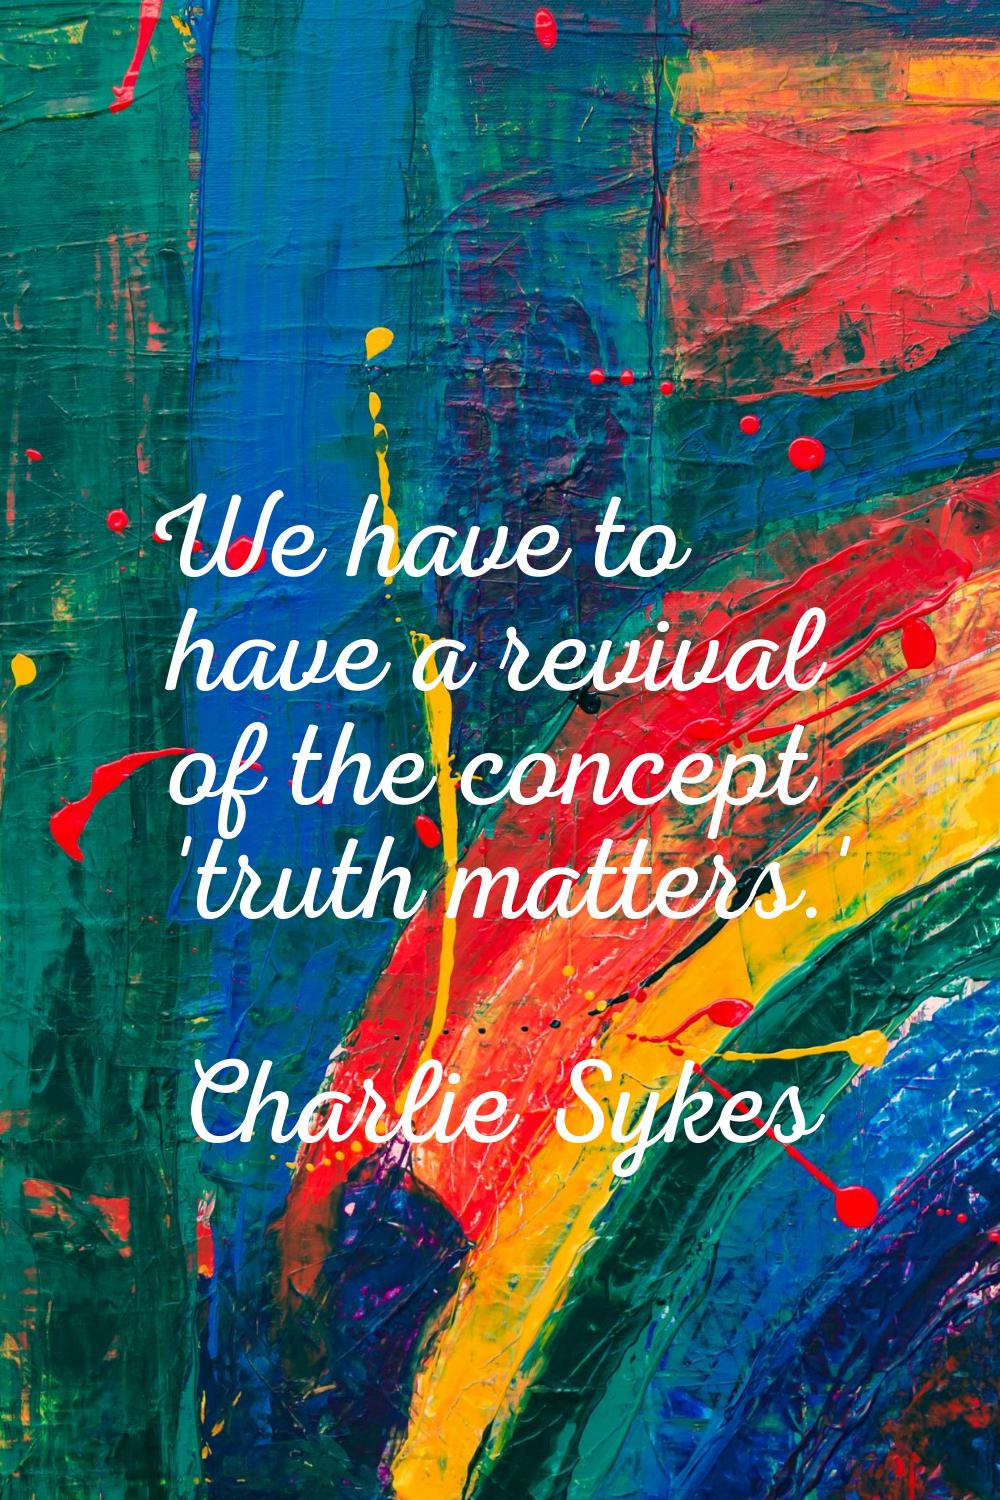 We have to have a revival of the concept 'truth matters.'